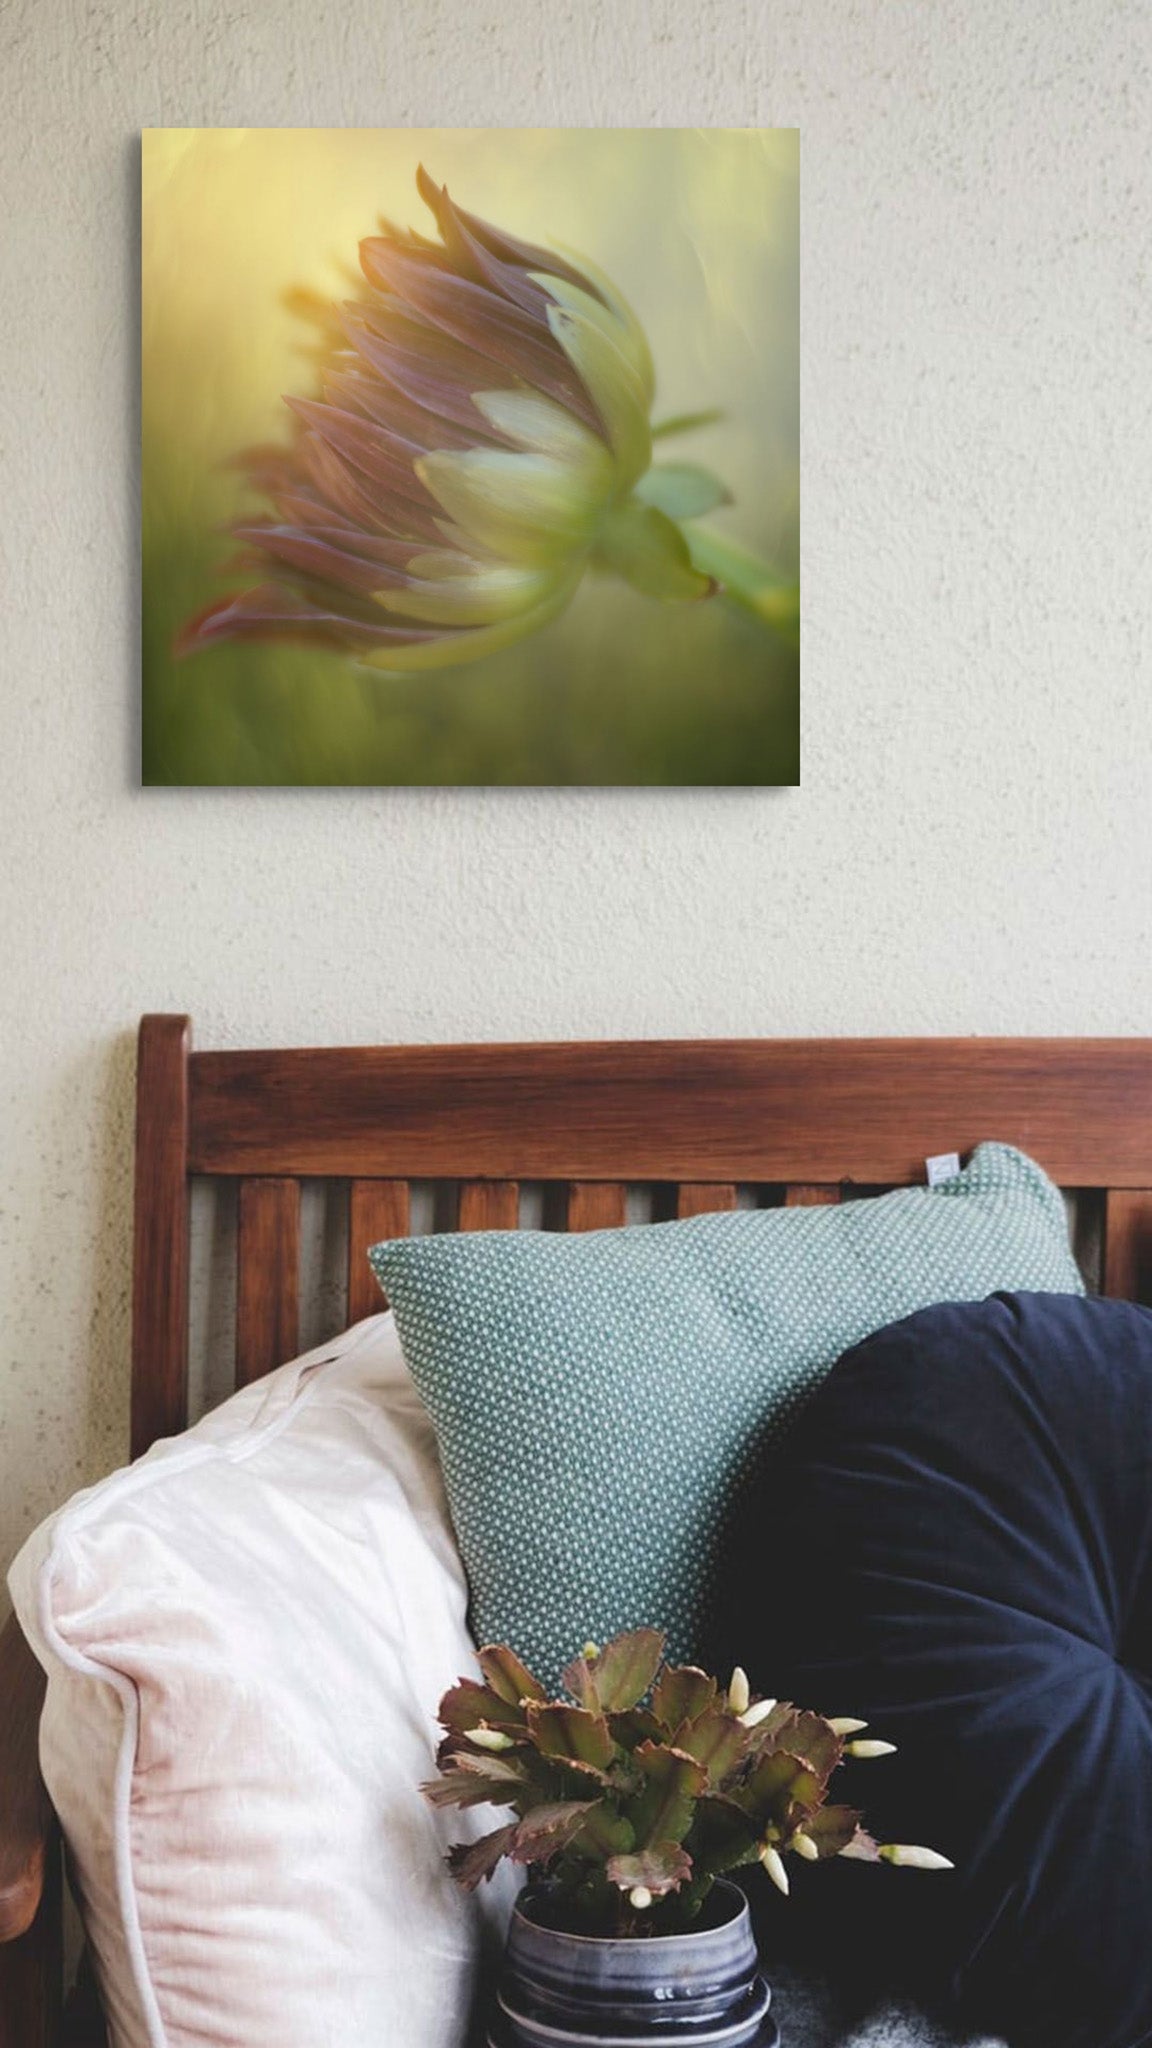 Picture hanging on the wall of a bedroom beside a bench. The bench has pillows and a plant in a pot on it. The picture is a fine art photograph of a Dahlia bud closed and in the sunlight. The photograph was taken by Cameron Dreaux. 